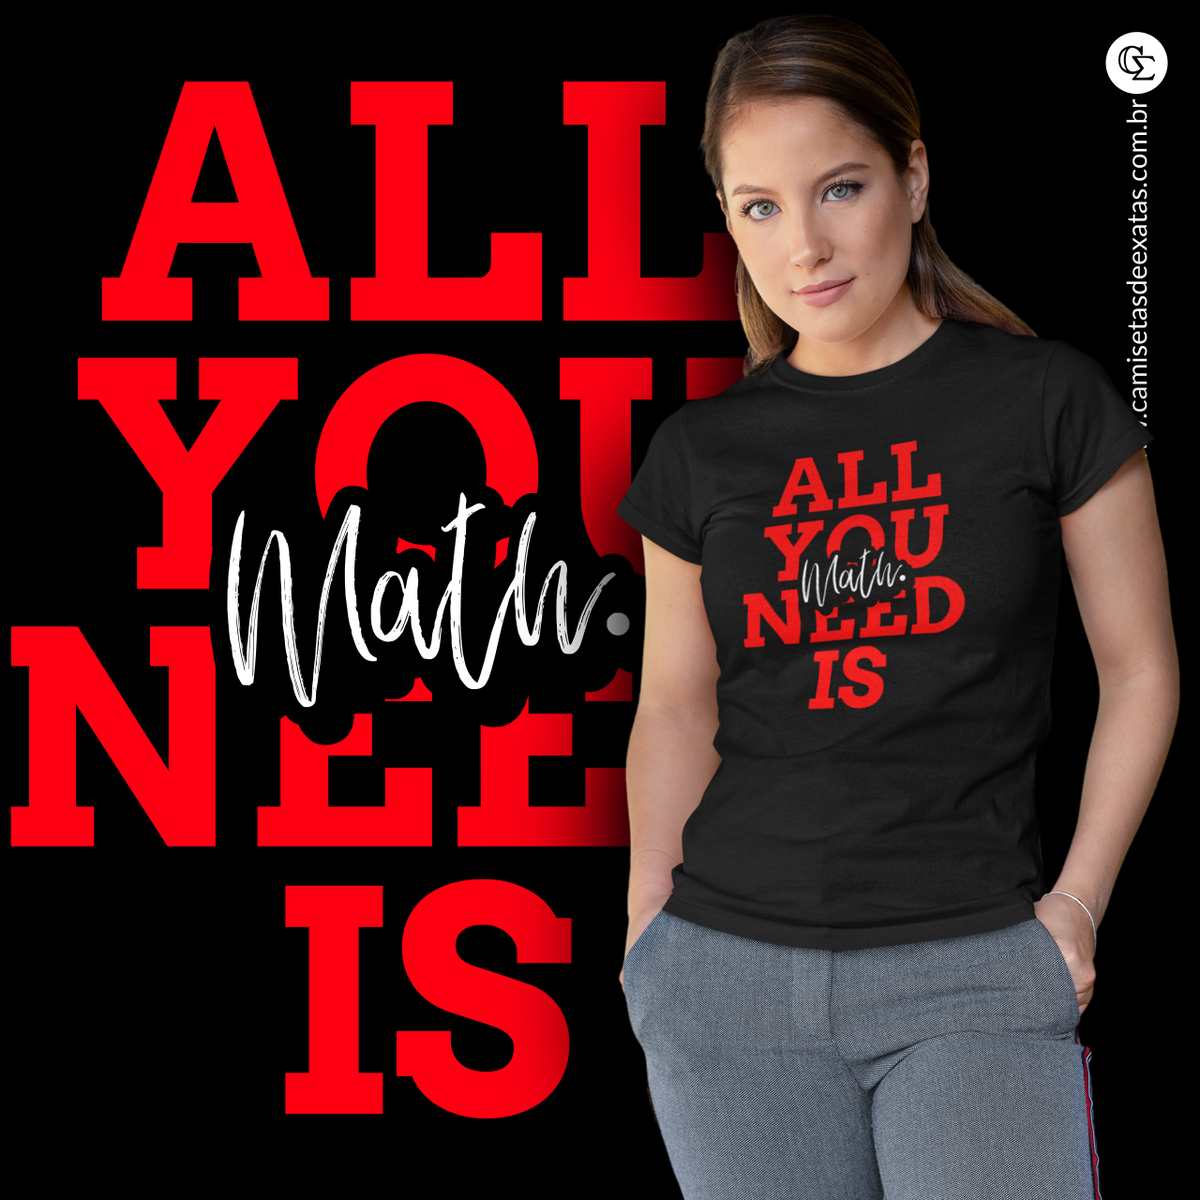 Nome do produto: ALL YOU NEED IS MATH [2]